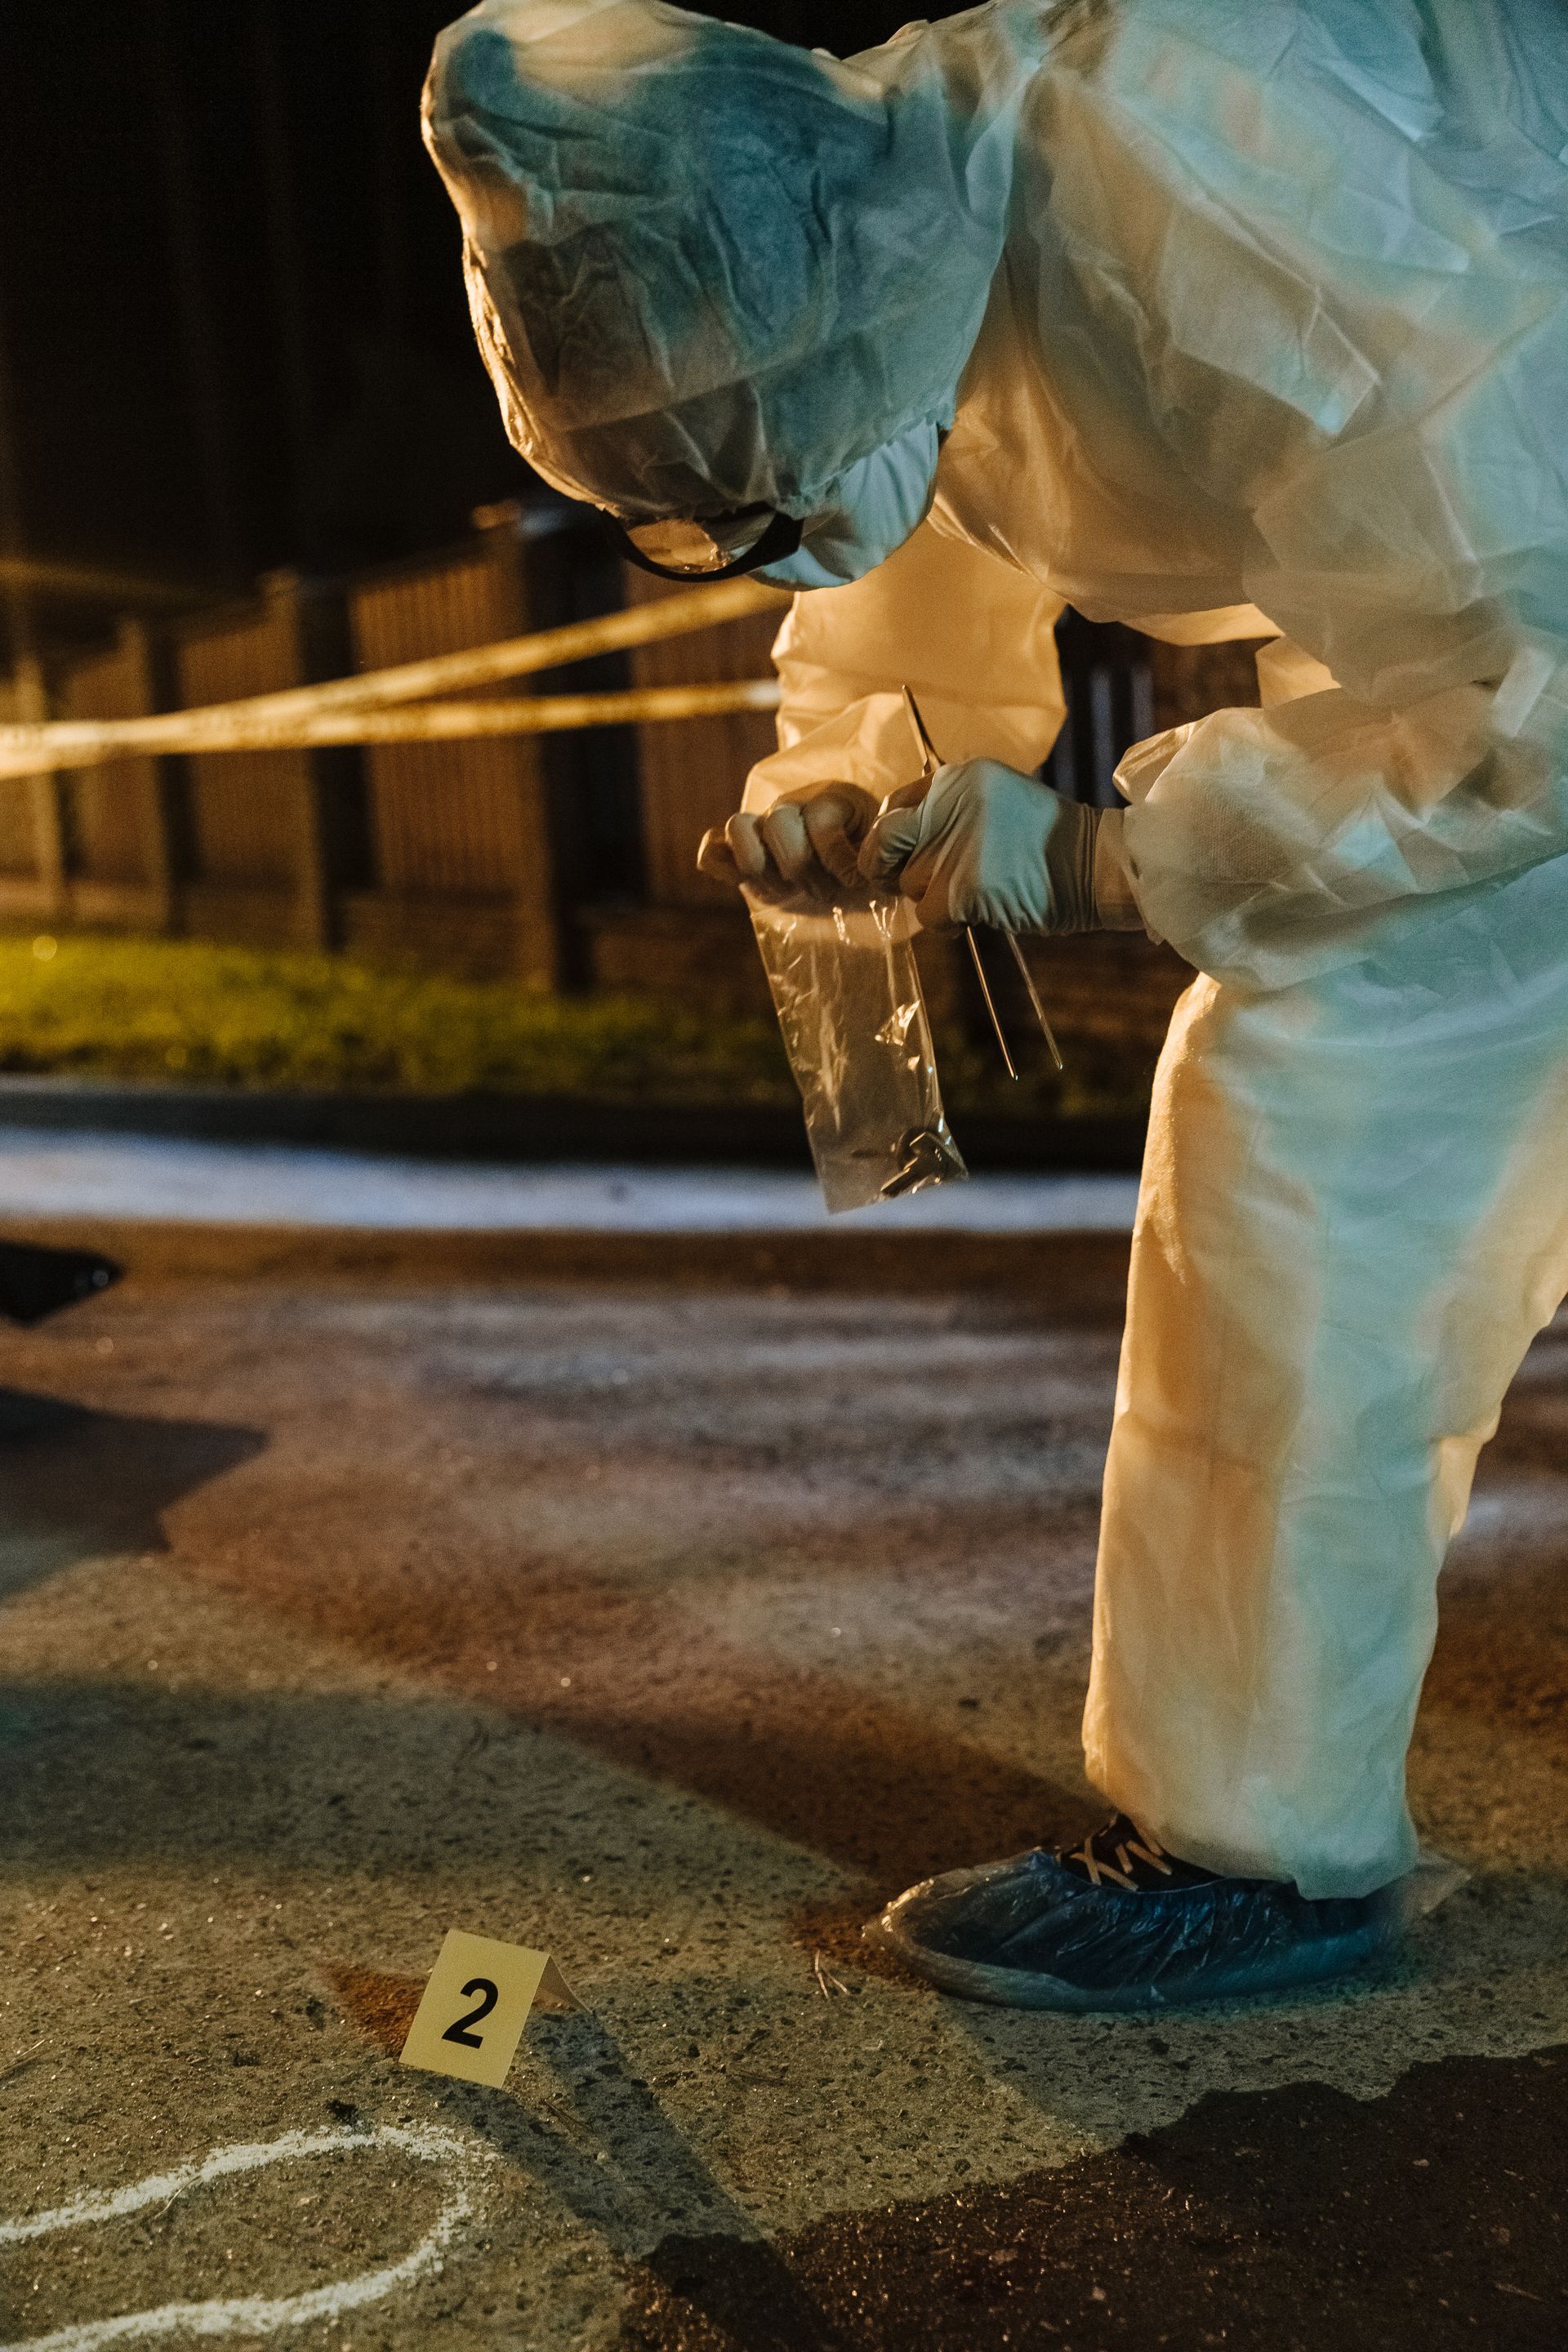 BioHazard Cleaning Services doing a crime scene cleanup.